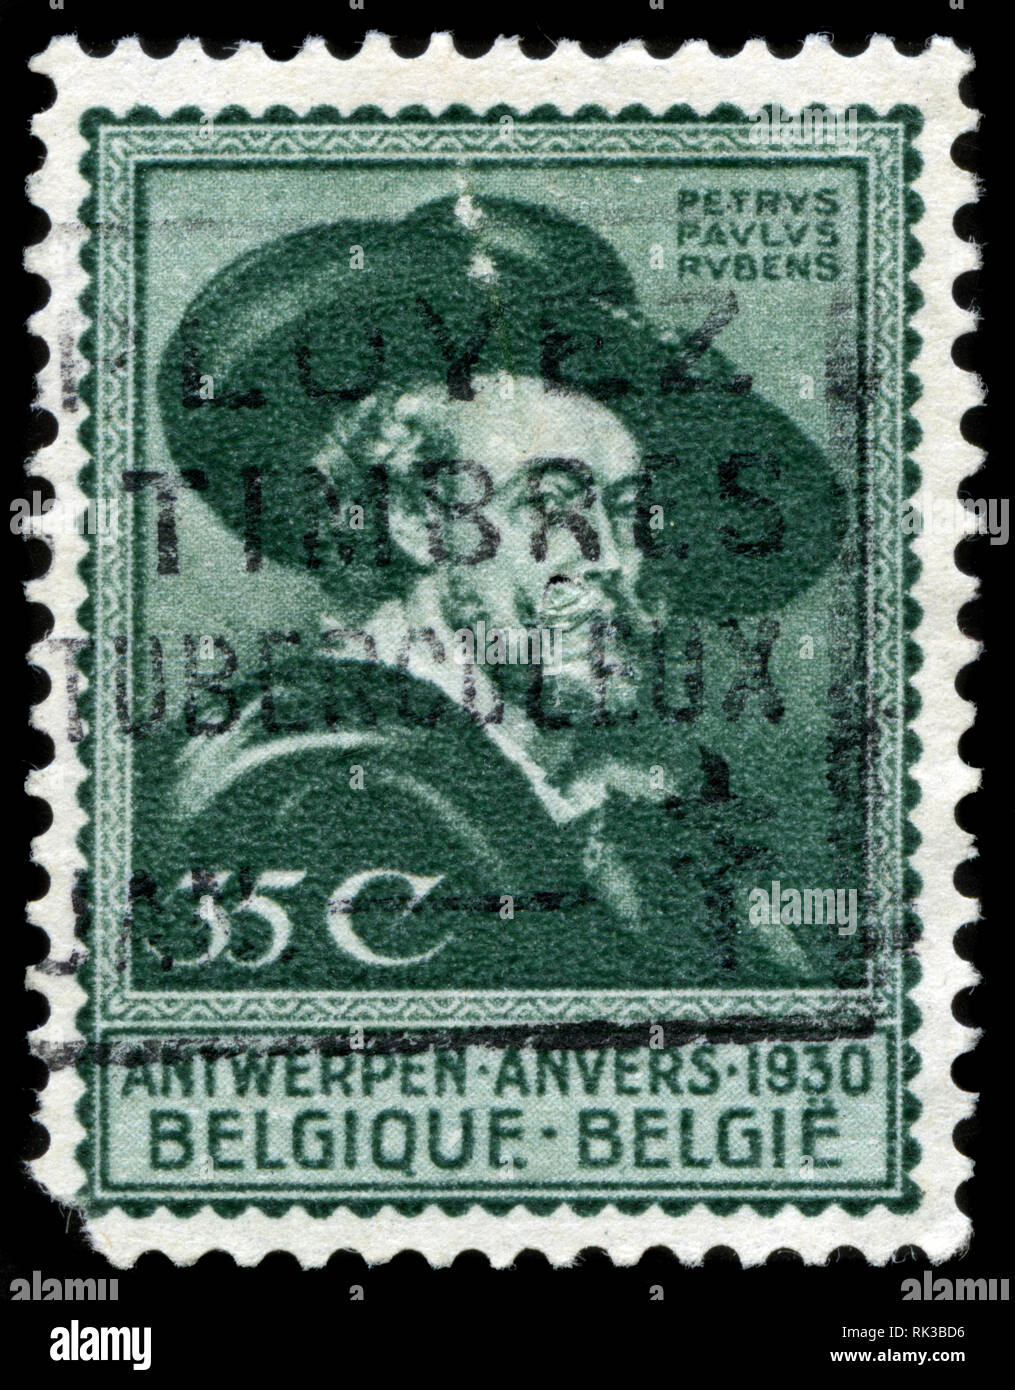 Postage stamp from Belgium issued in 1930 Stock Photo